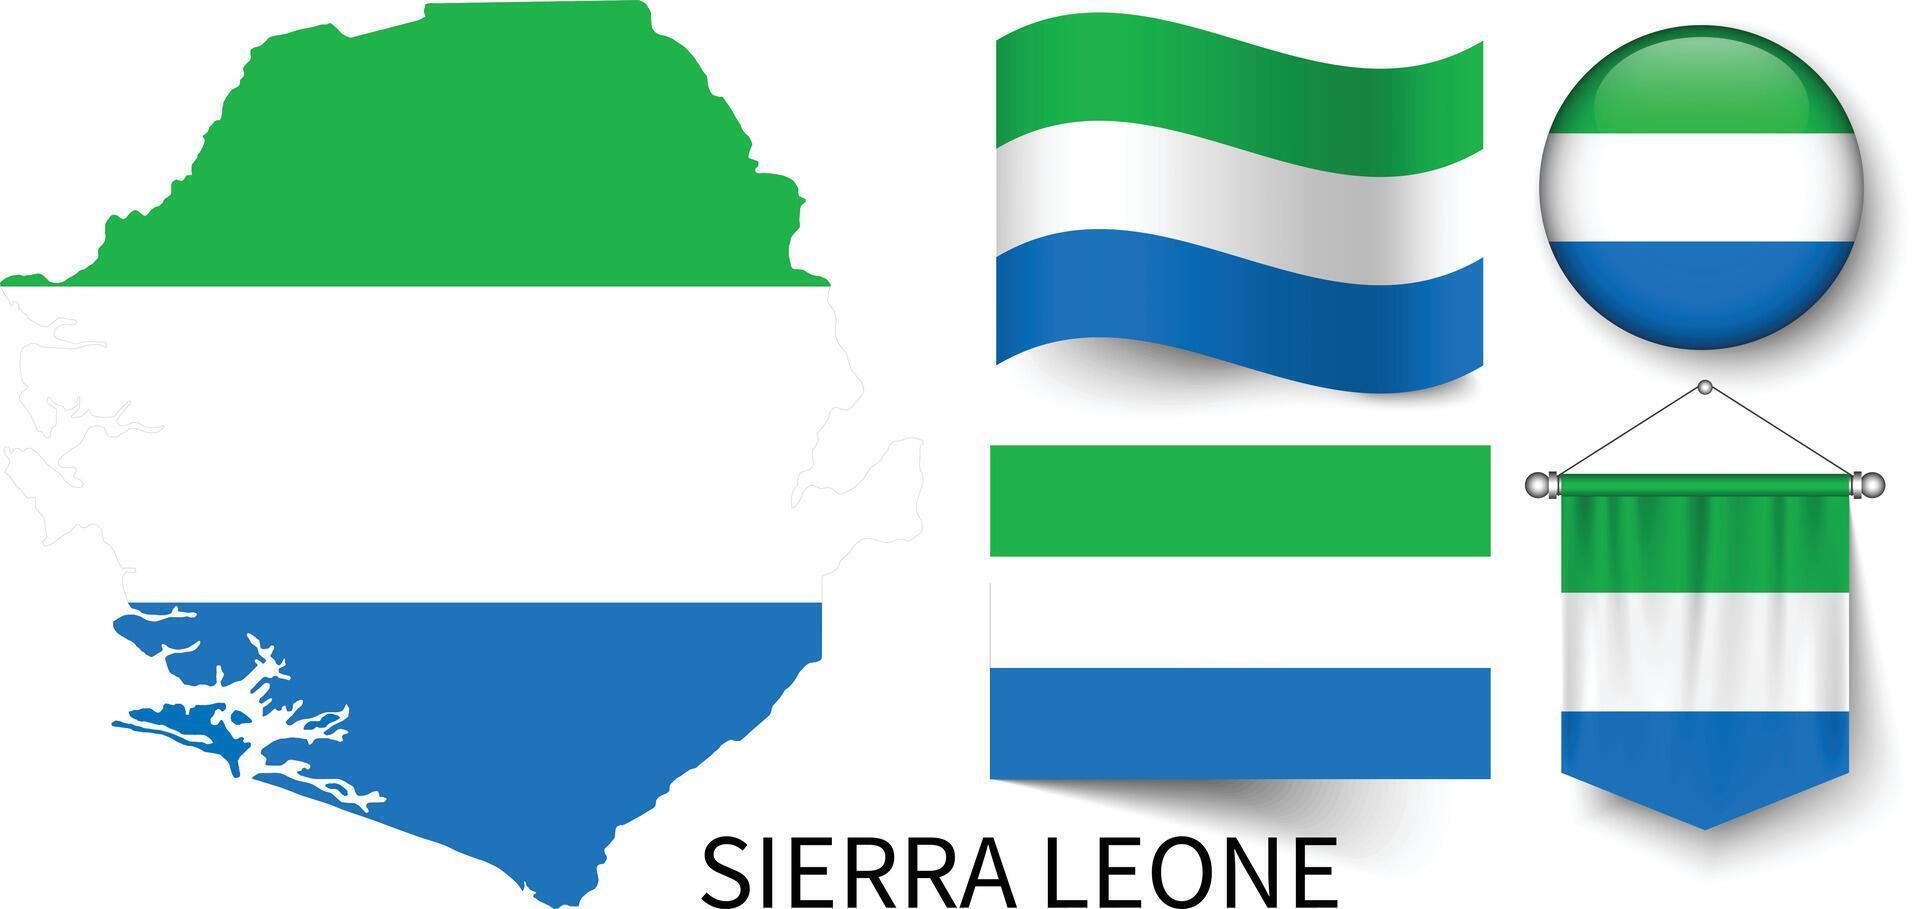 The various patterns of the Sierra Leone national flags and the map of Sierra Leone's borders vector